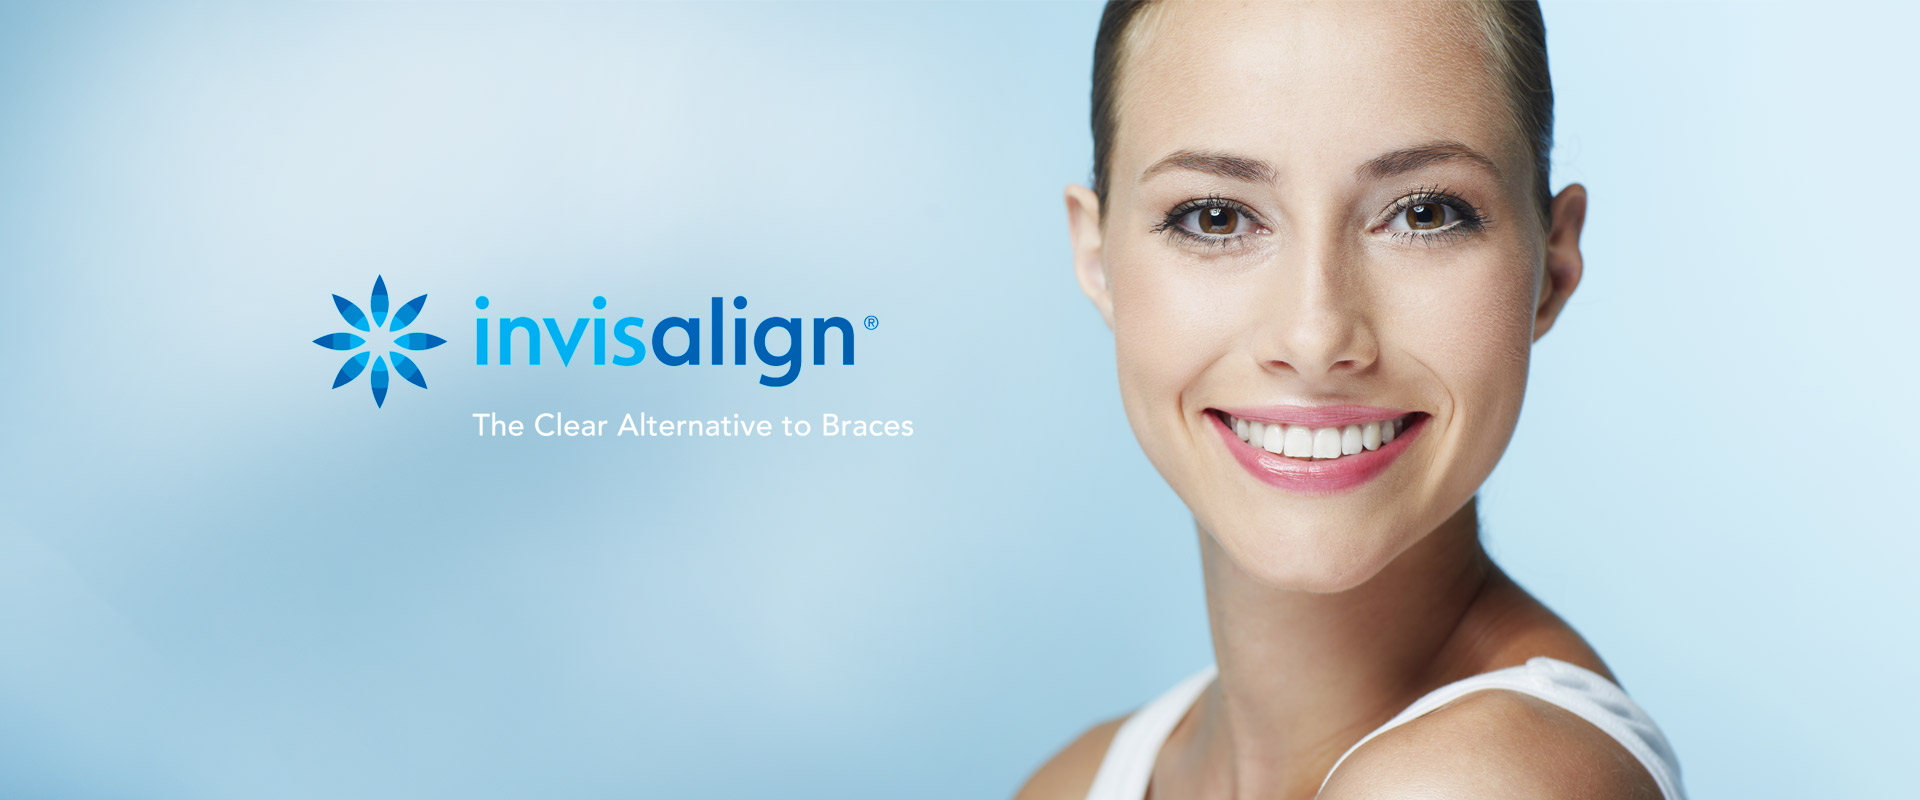 Invisalign the clear alternative to braces